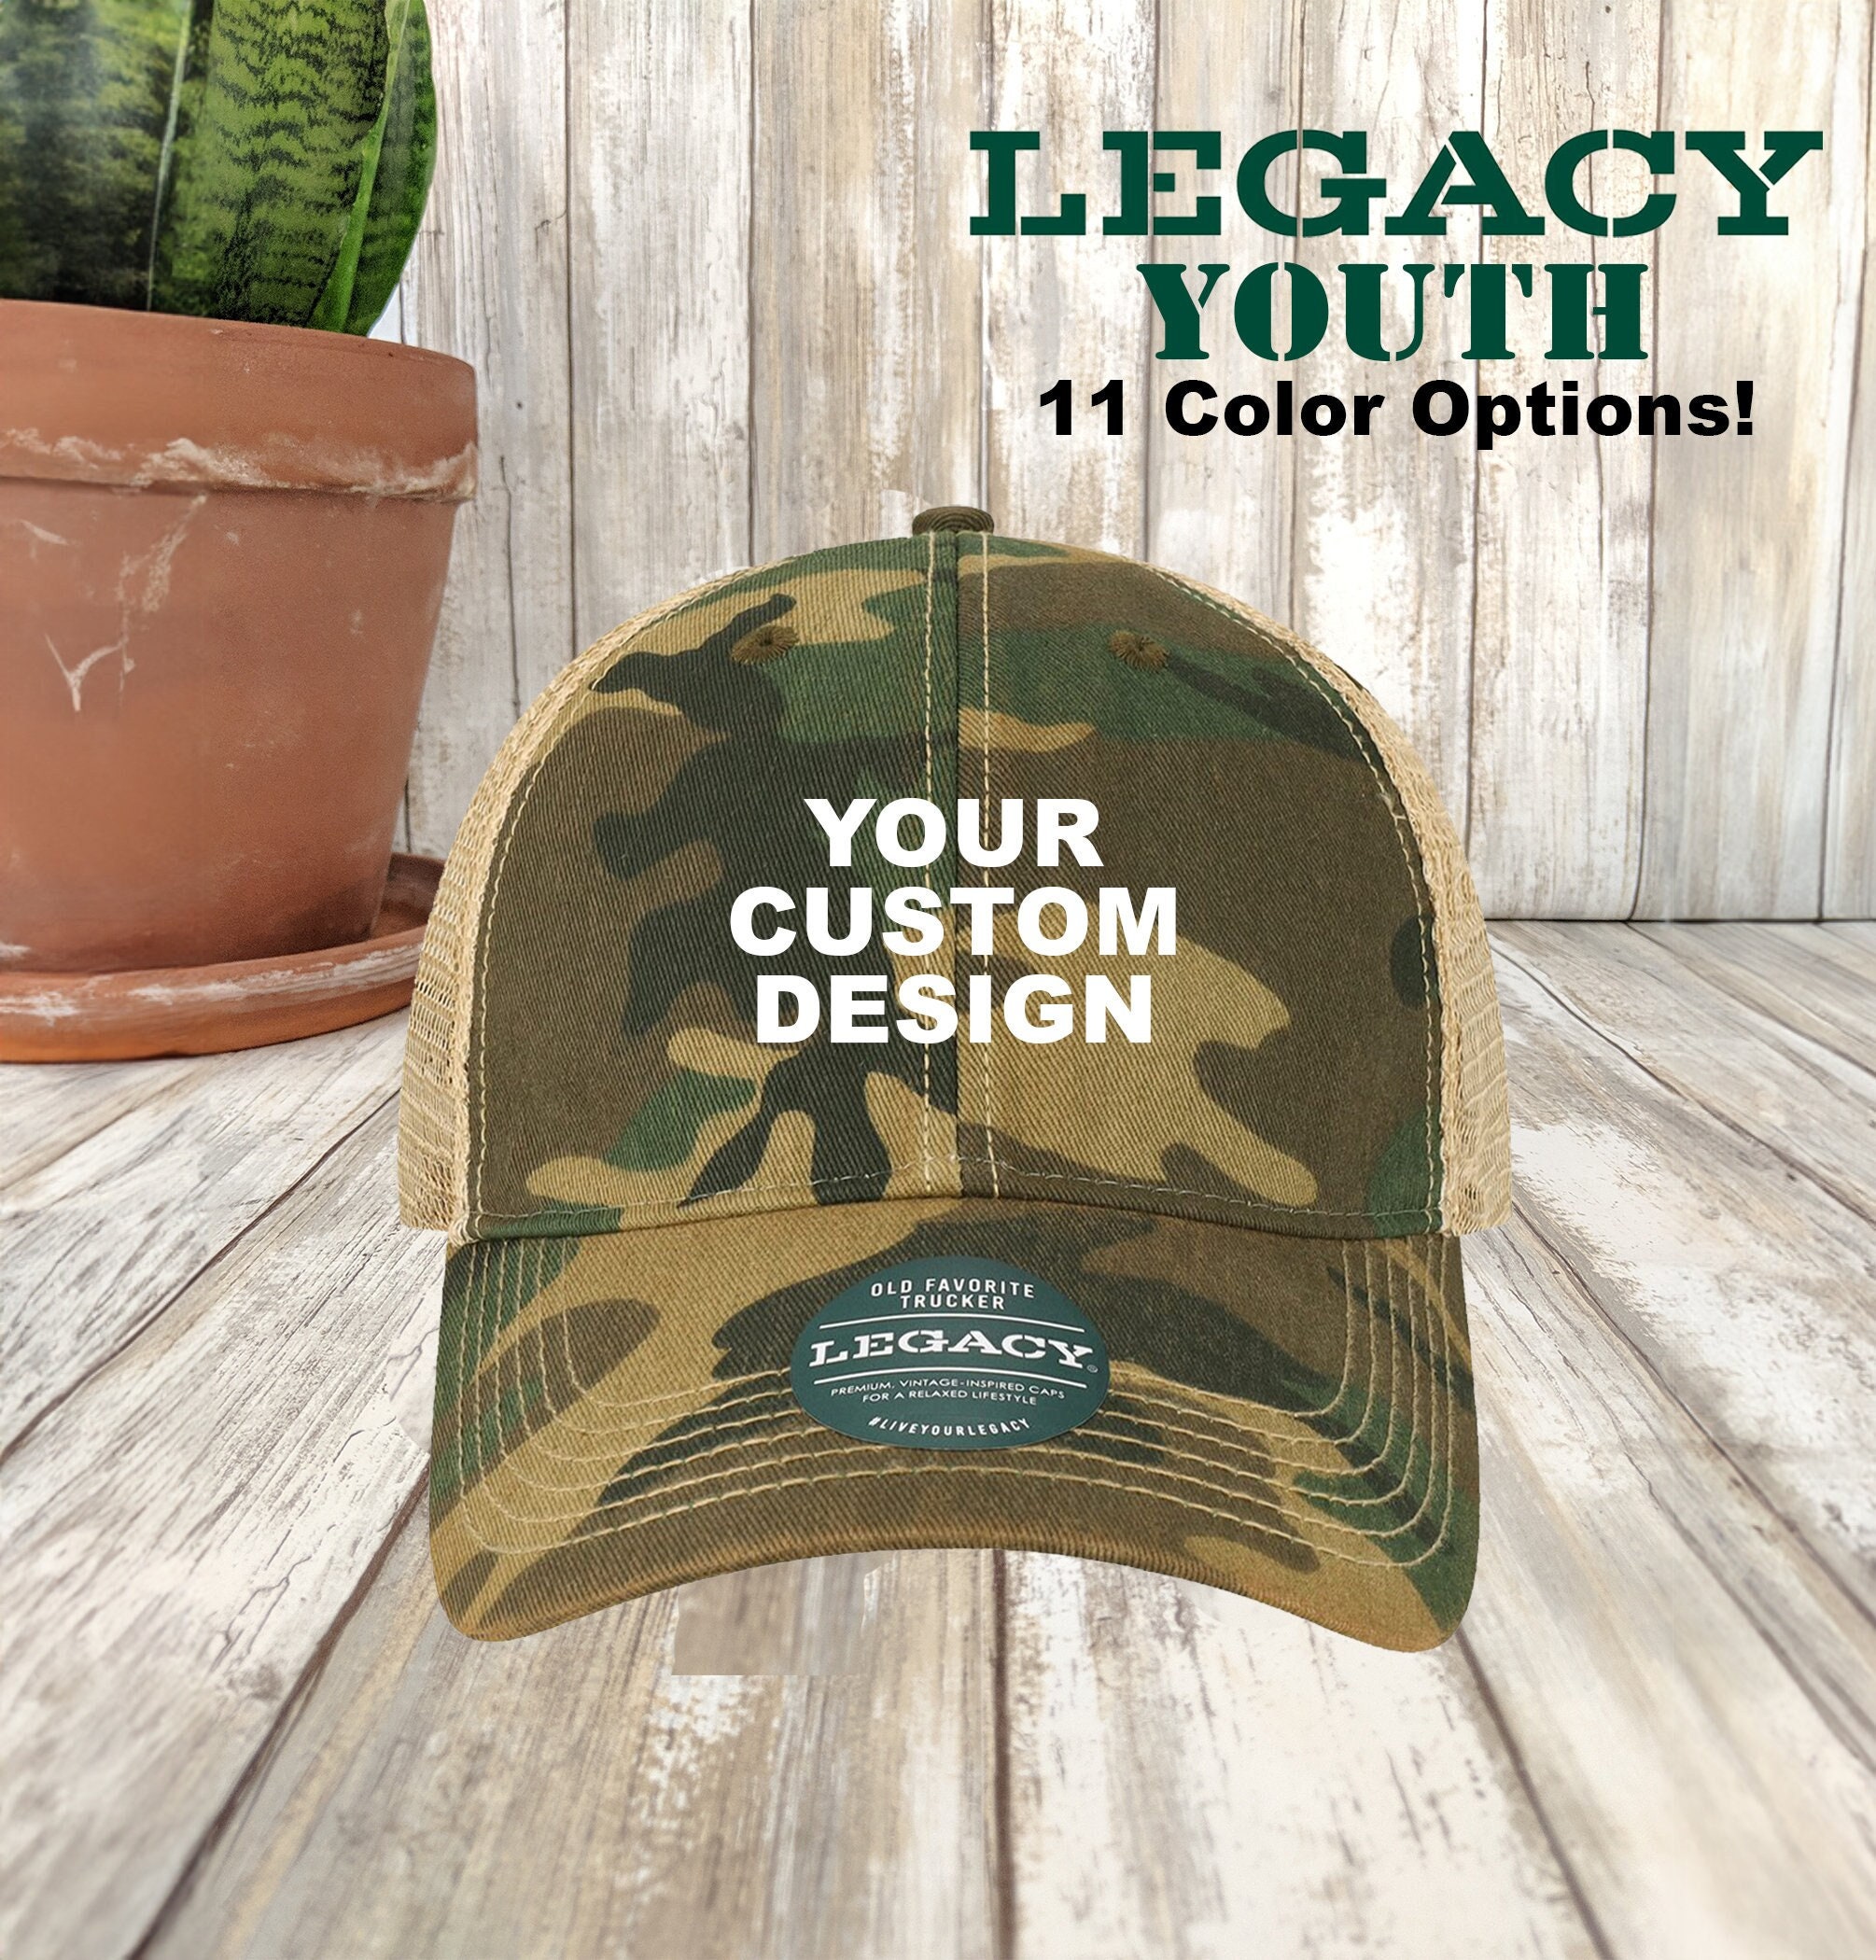 LEGACY Custom Youth Trucker Unstructured / / 6 Size Youth Old Panel Trucker Hat Caps / Mesh - Personalized Favorite / Embroidered Etsy 